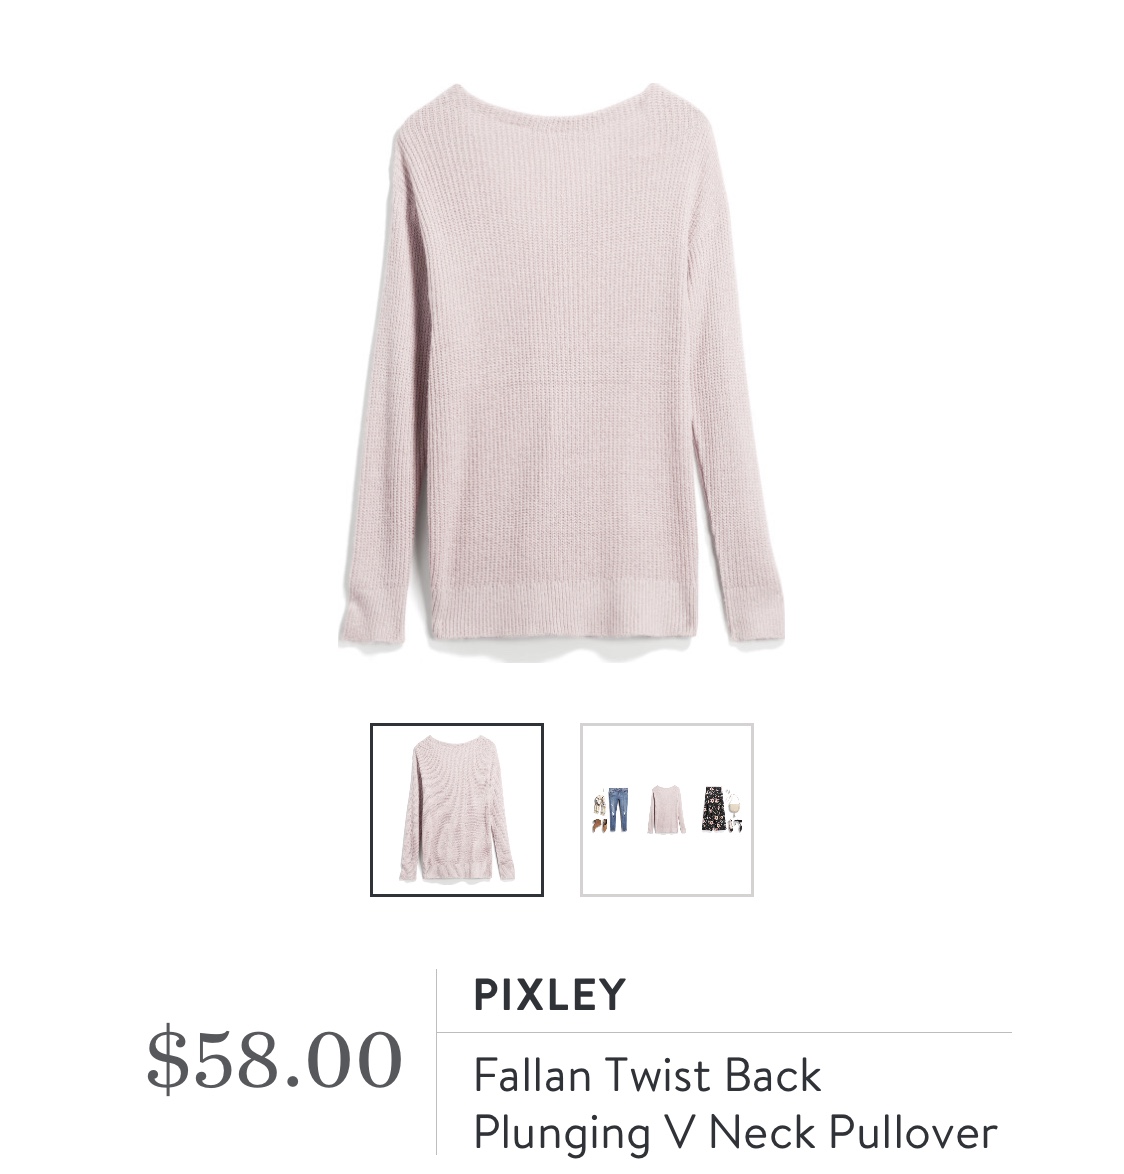 Stitch Fix Review for February 2020 - Fix #78 - Sweet Pea